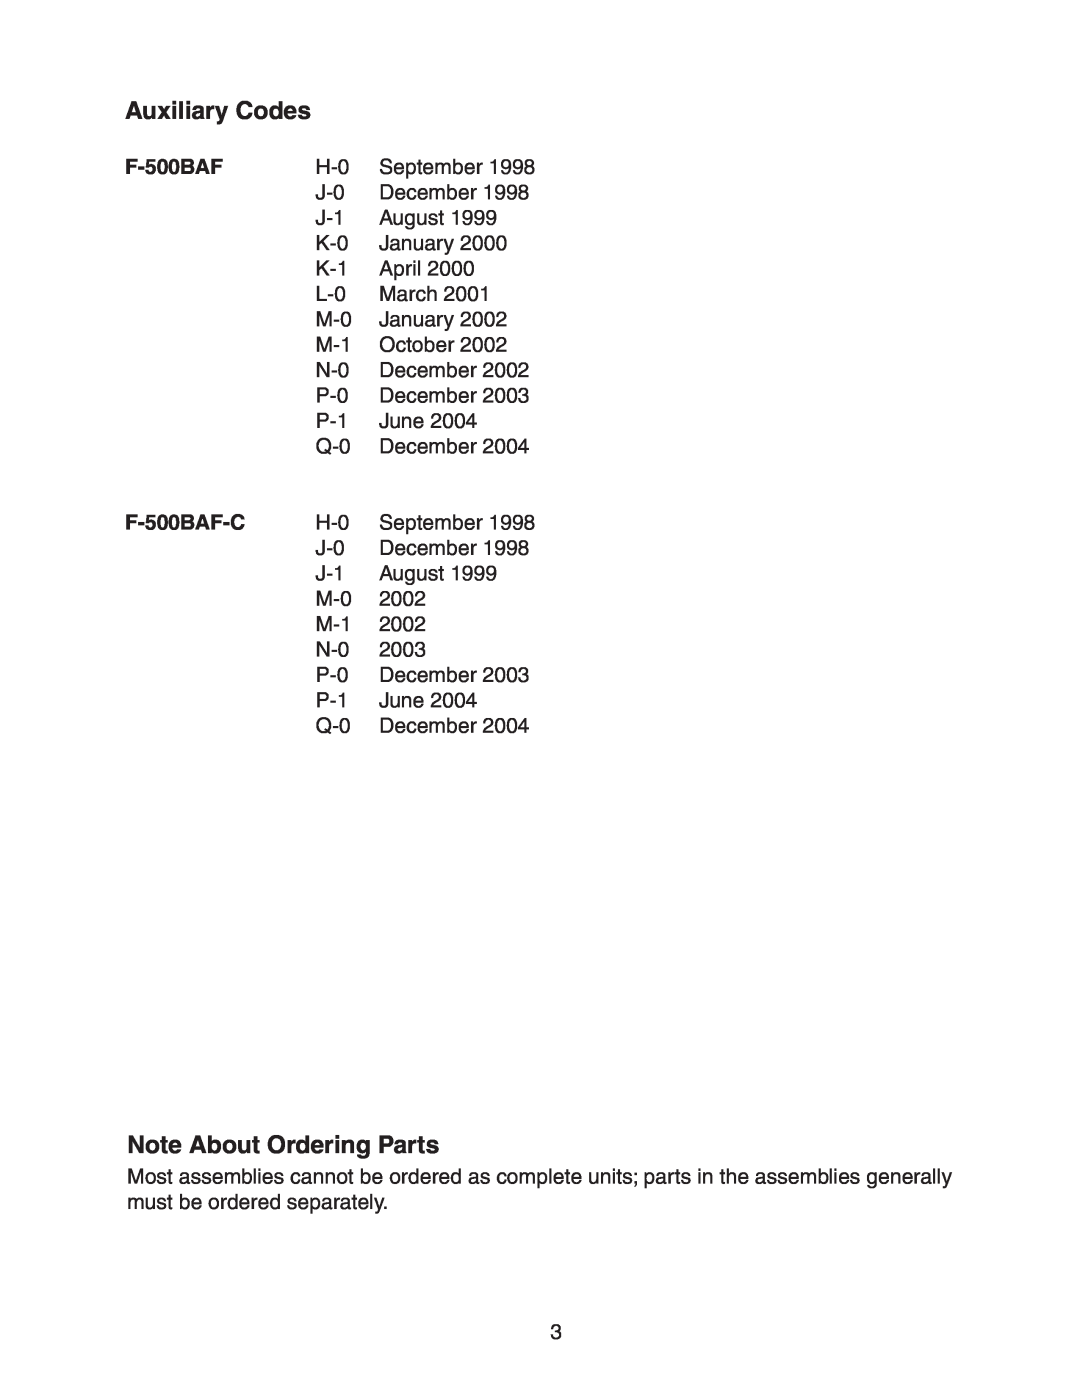 Hoshizaki F-500BAF/-C manual Auxiliary Codes, Note About Ordering Parts, F-500BAF-C 